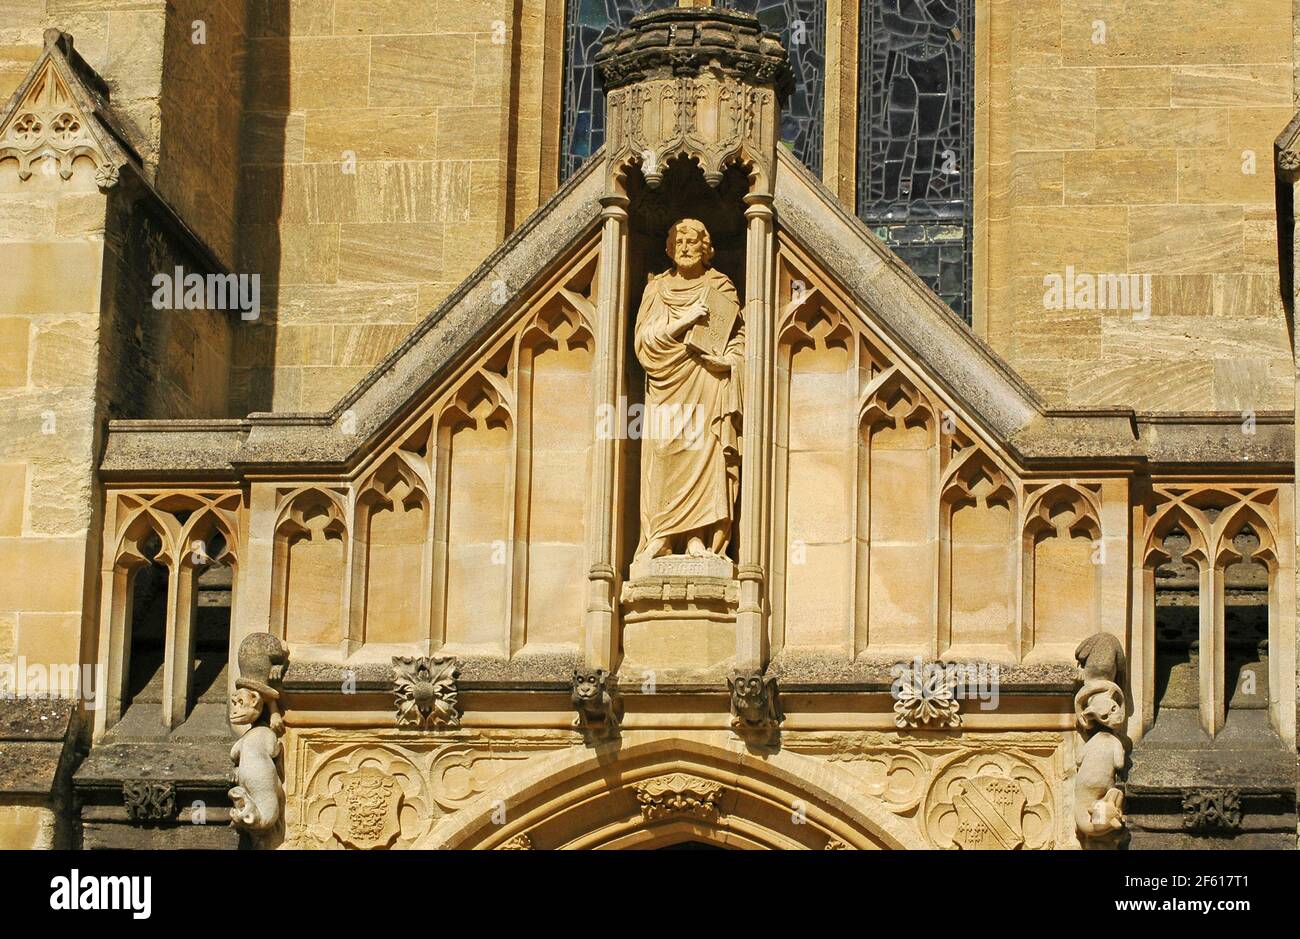 Carvings above a door, Mansfield College, Oxford. England, UK. Stock Photo